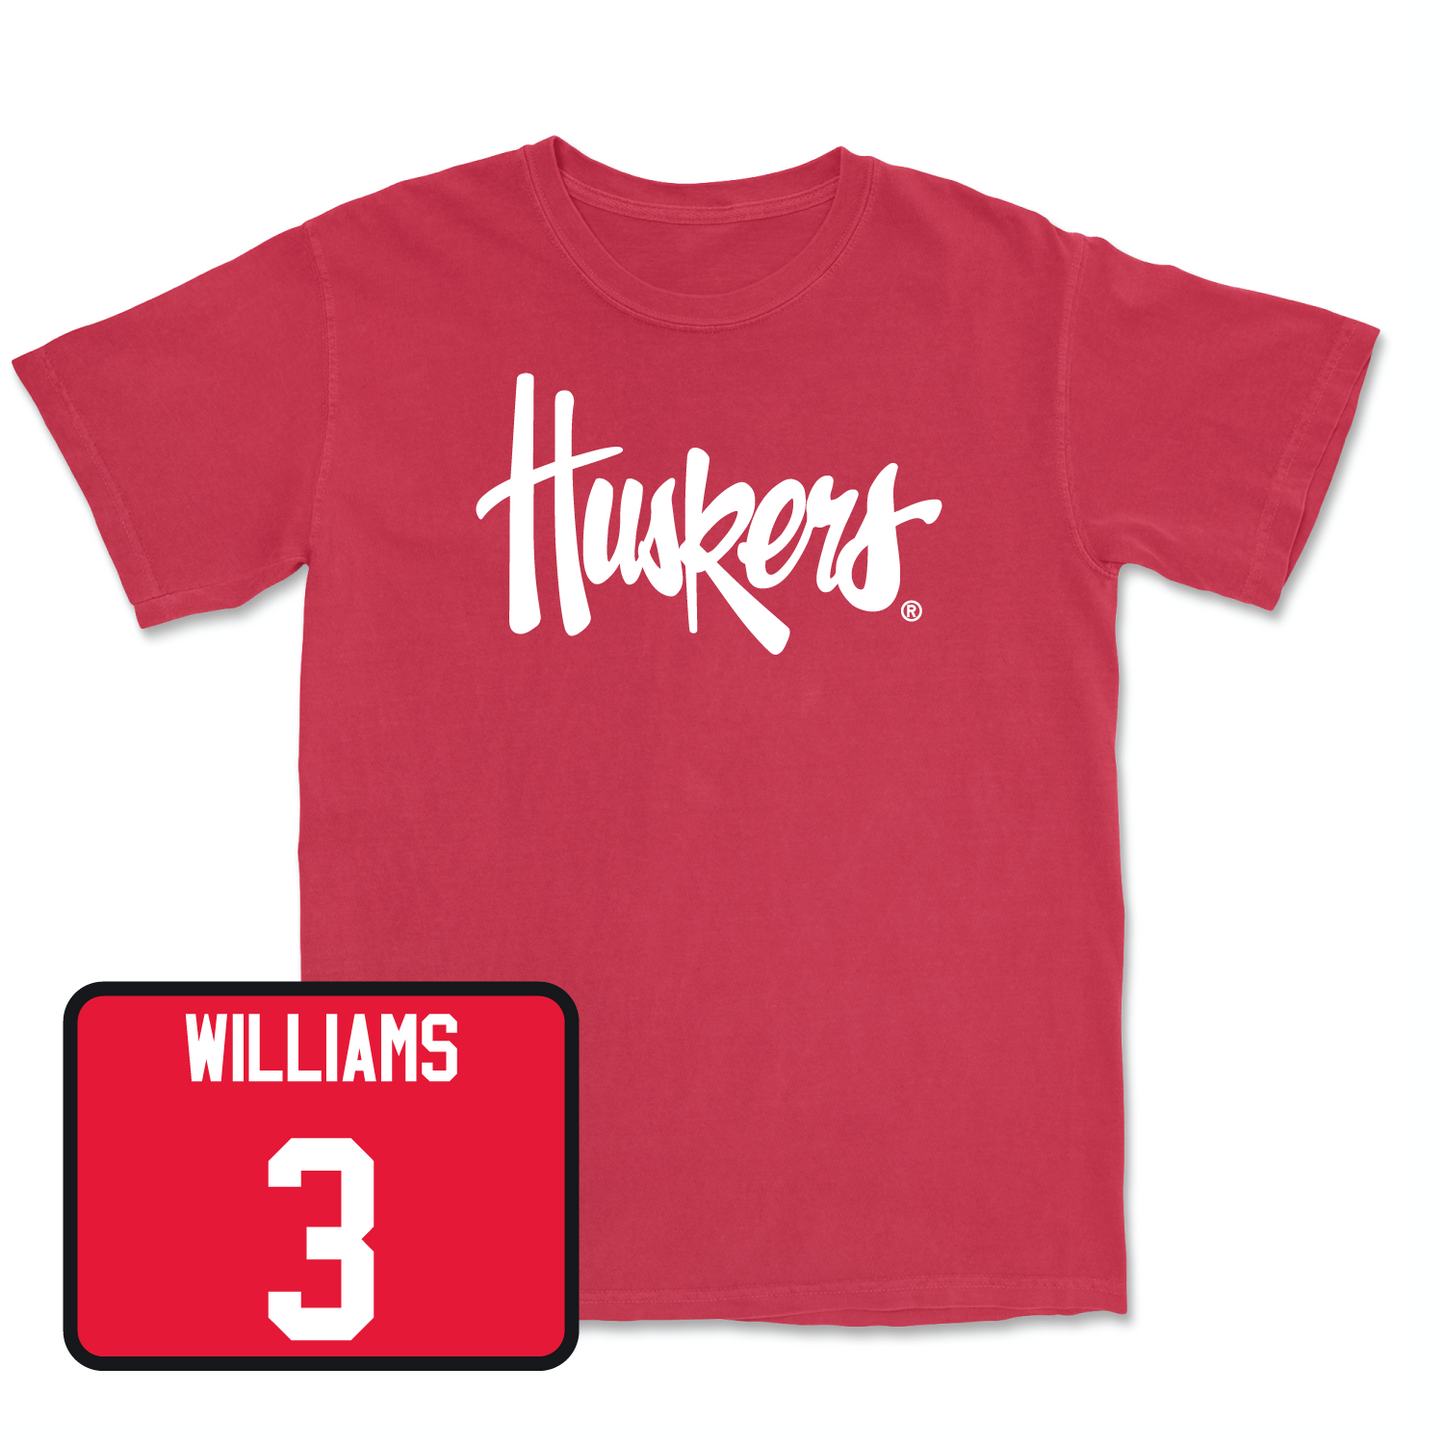 Red Men's Basketball Huskers Tee 2X-Large / Brice Williams | #3